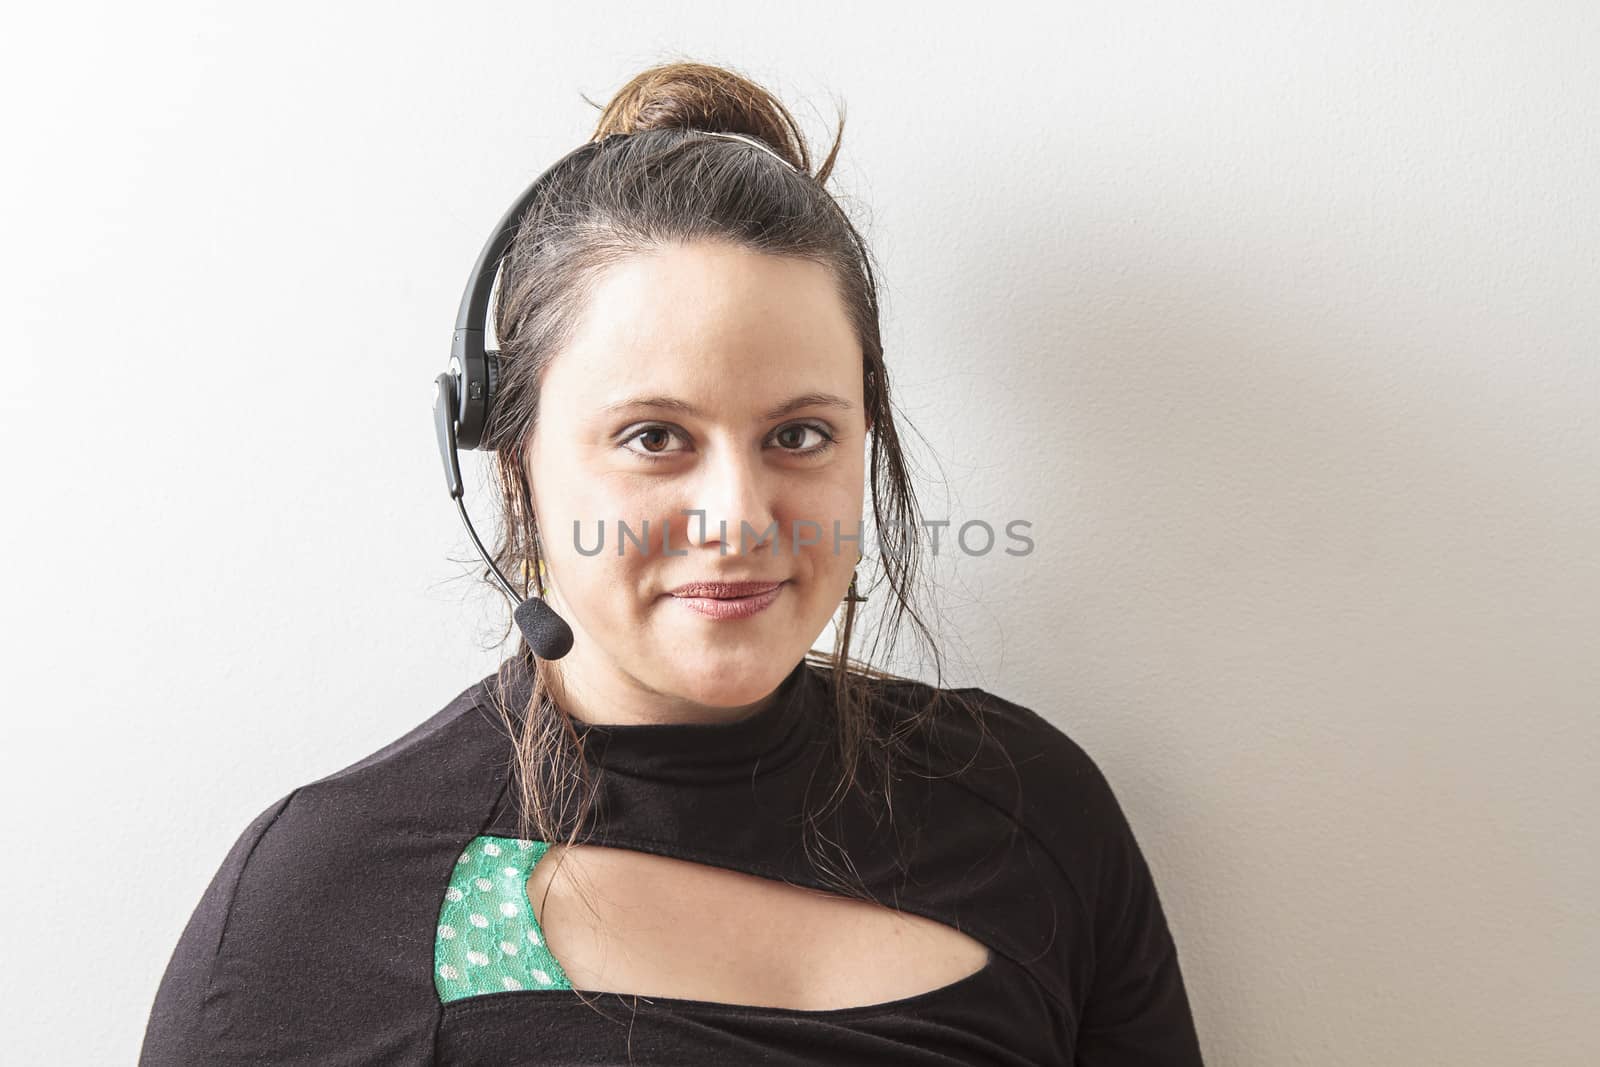 brunet woman with headset against white background